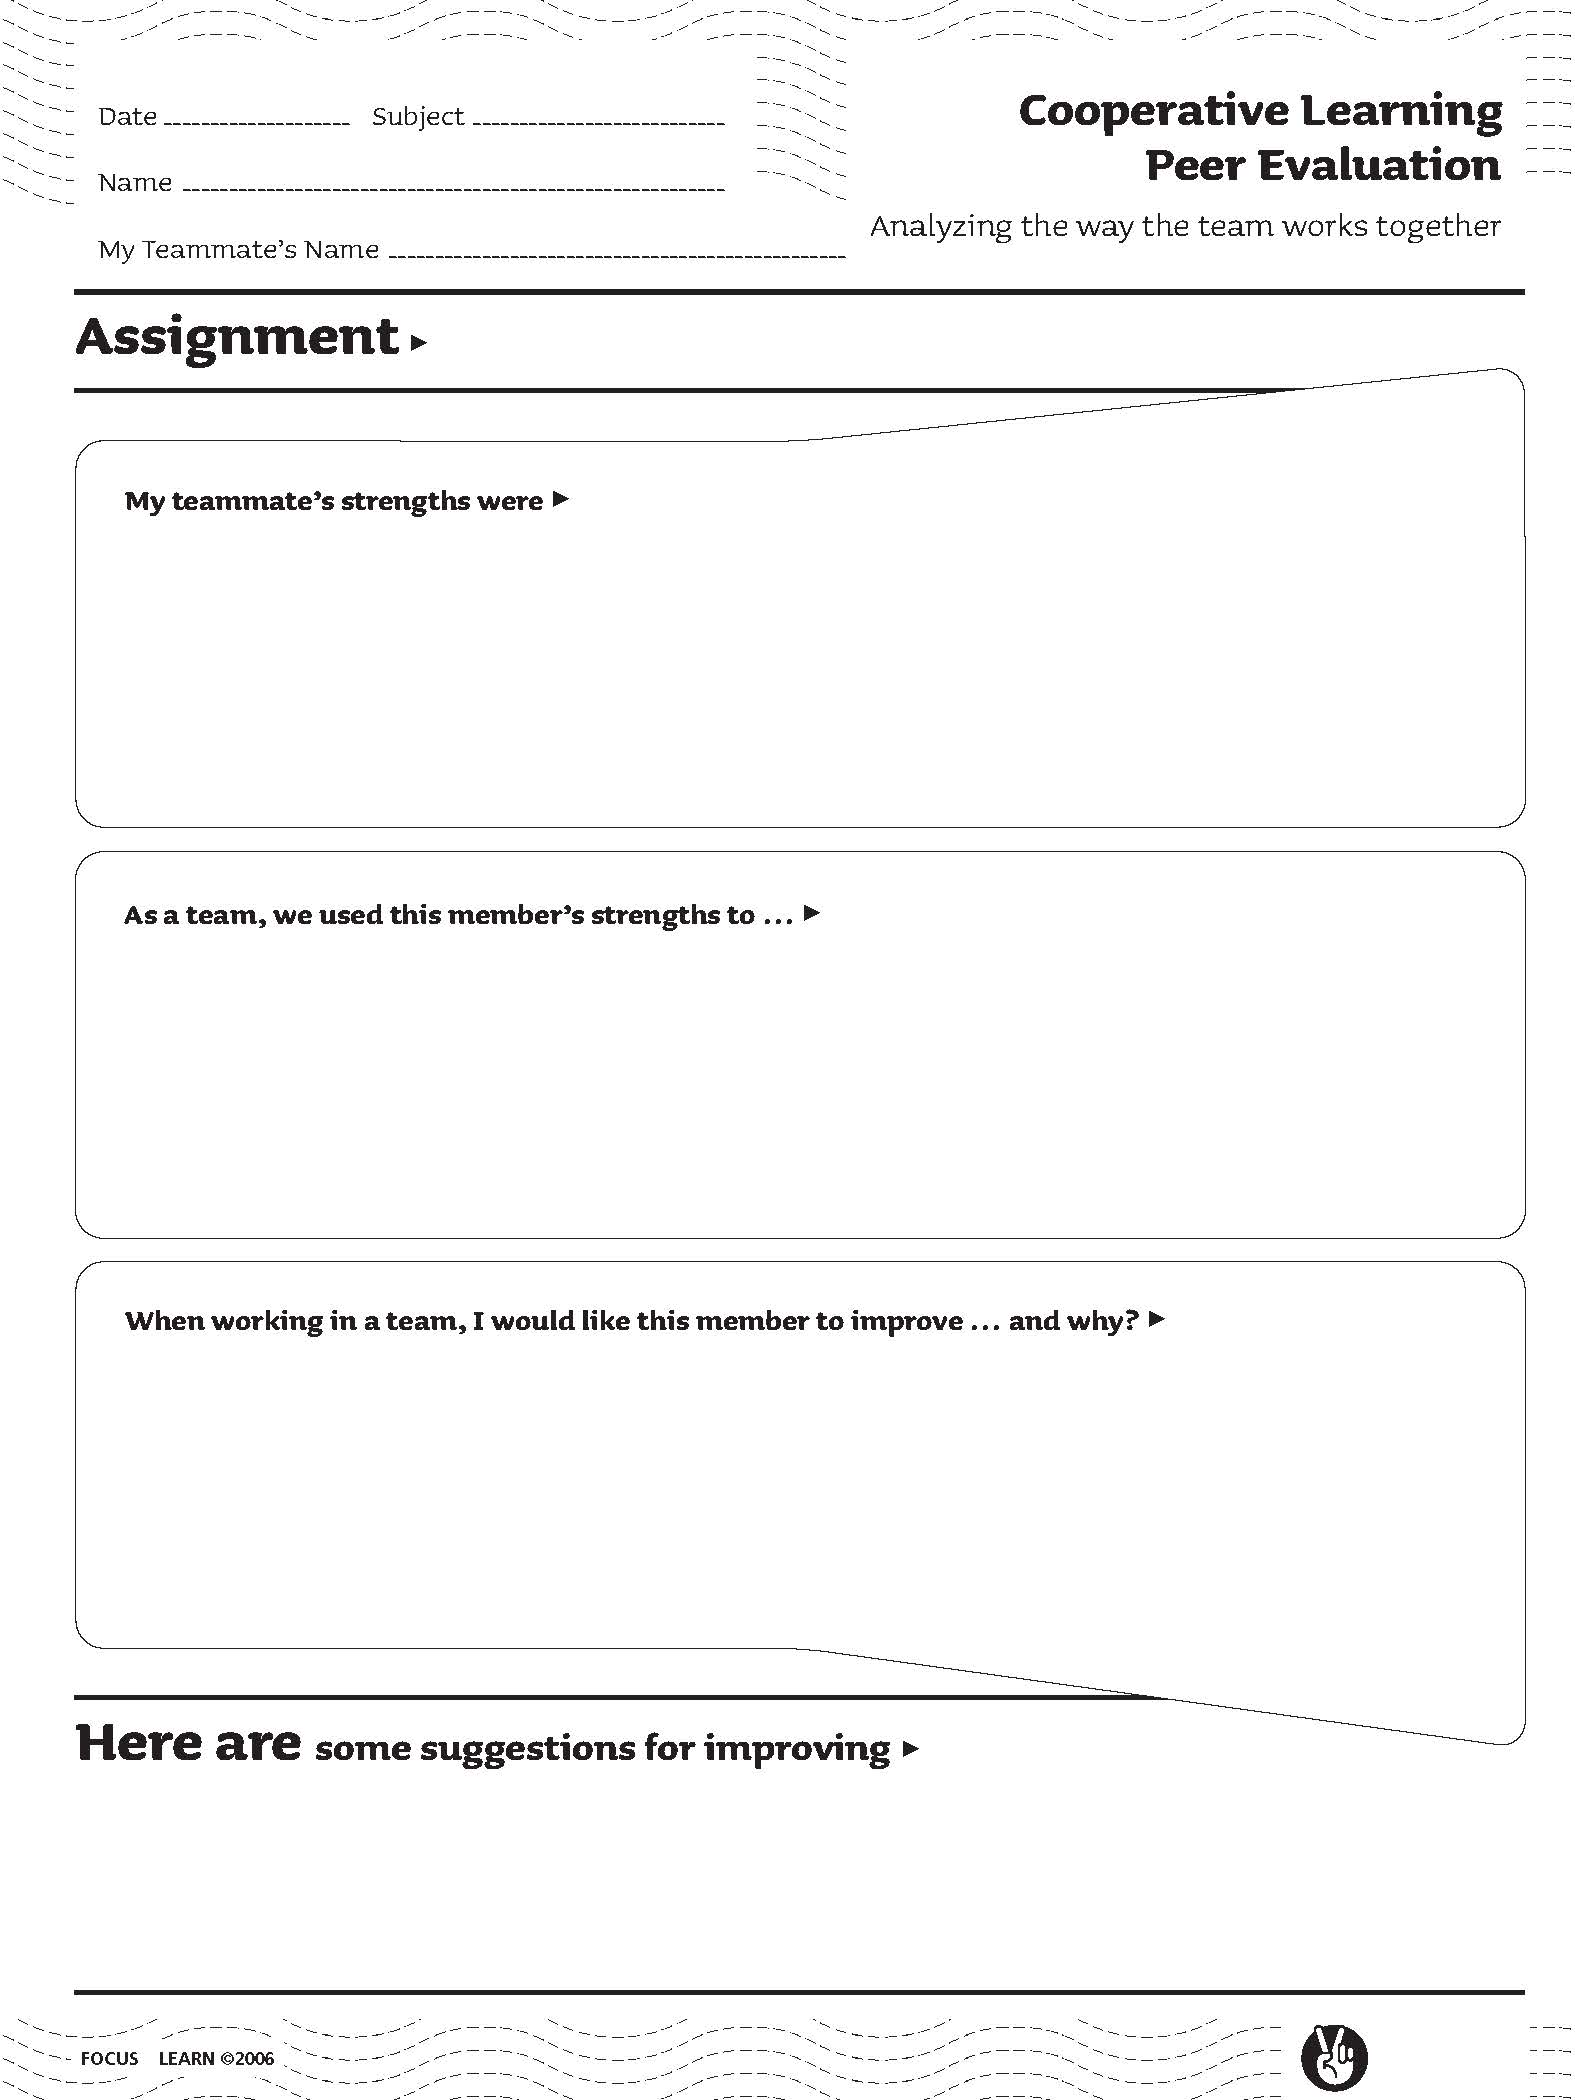 Cooperative Learning Peer Evaluation